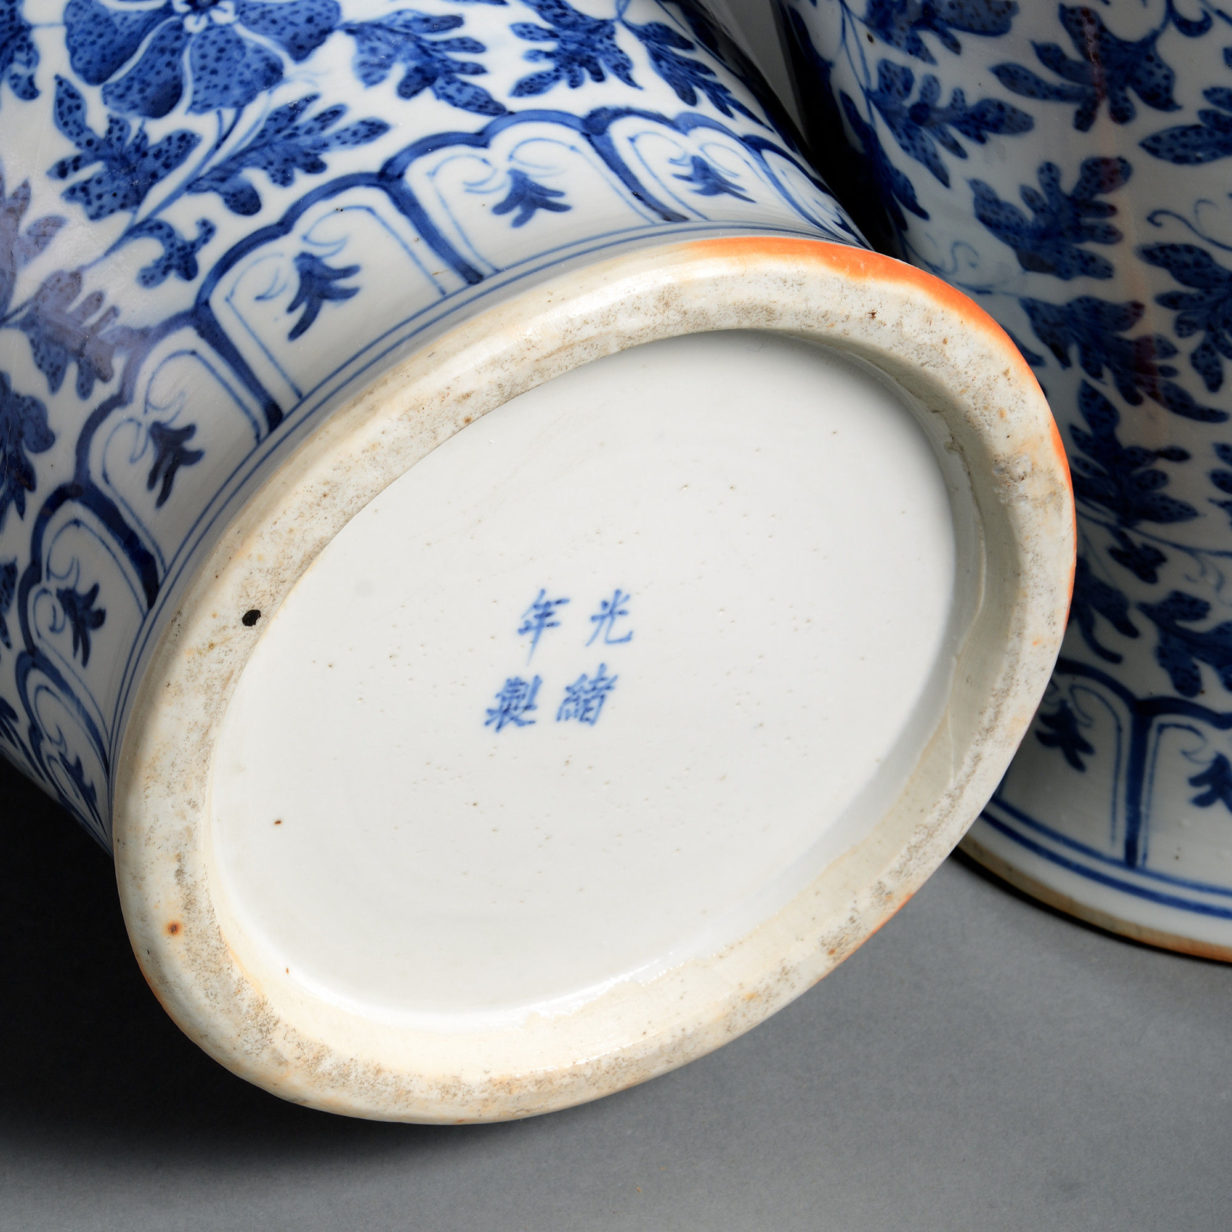 A pair of 19th century qing dynasty blue and white porcelain vases